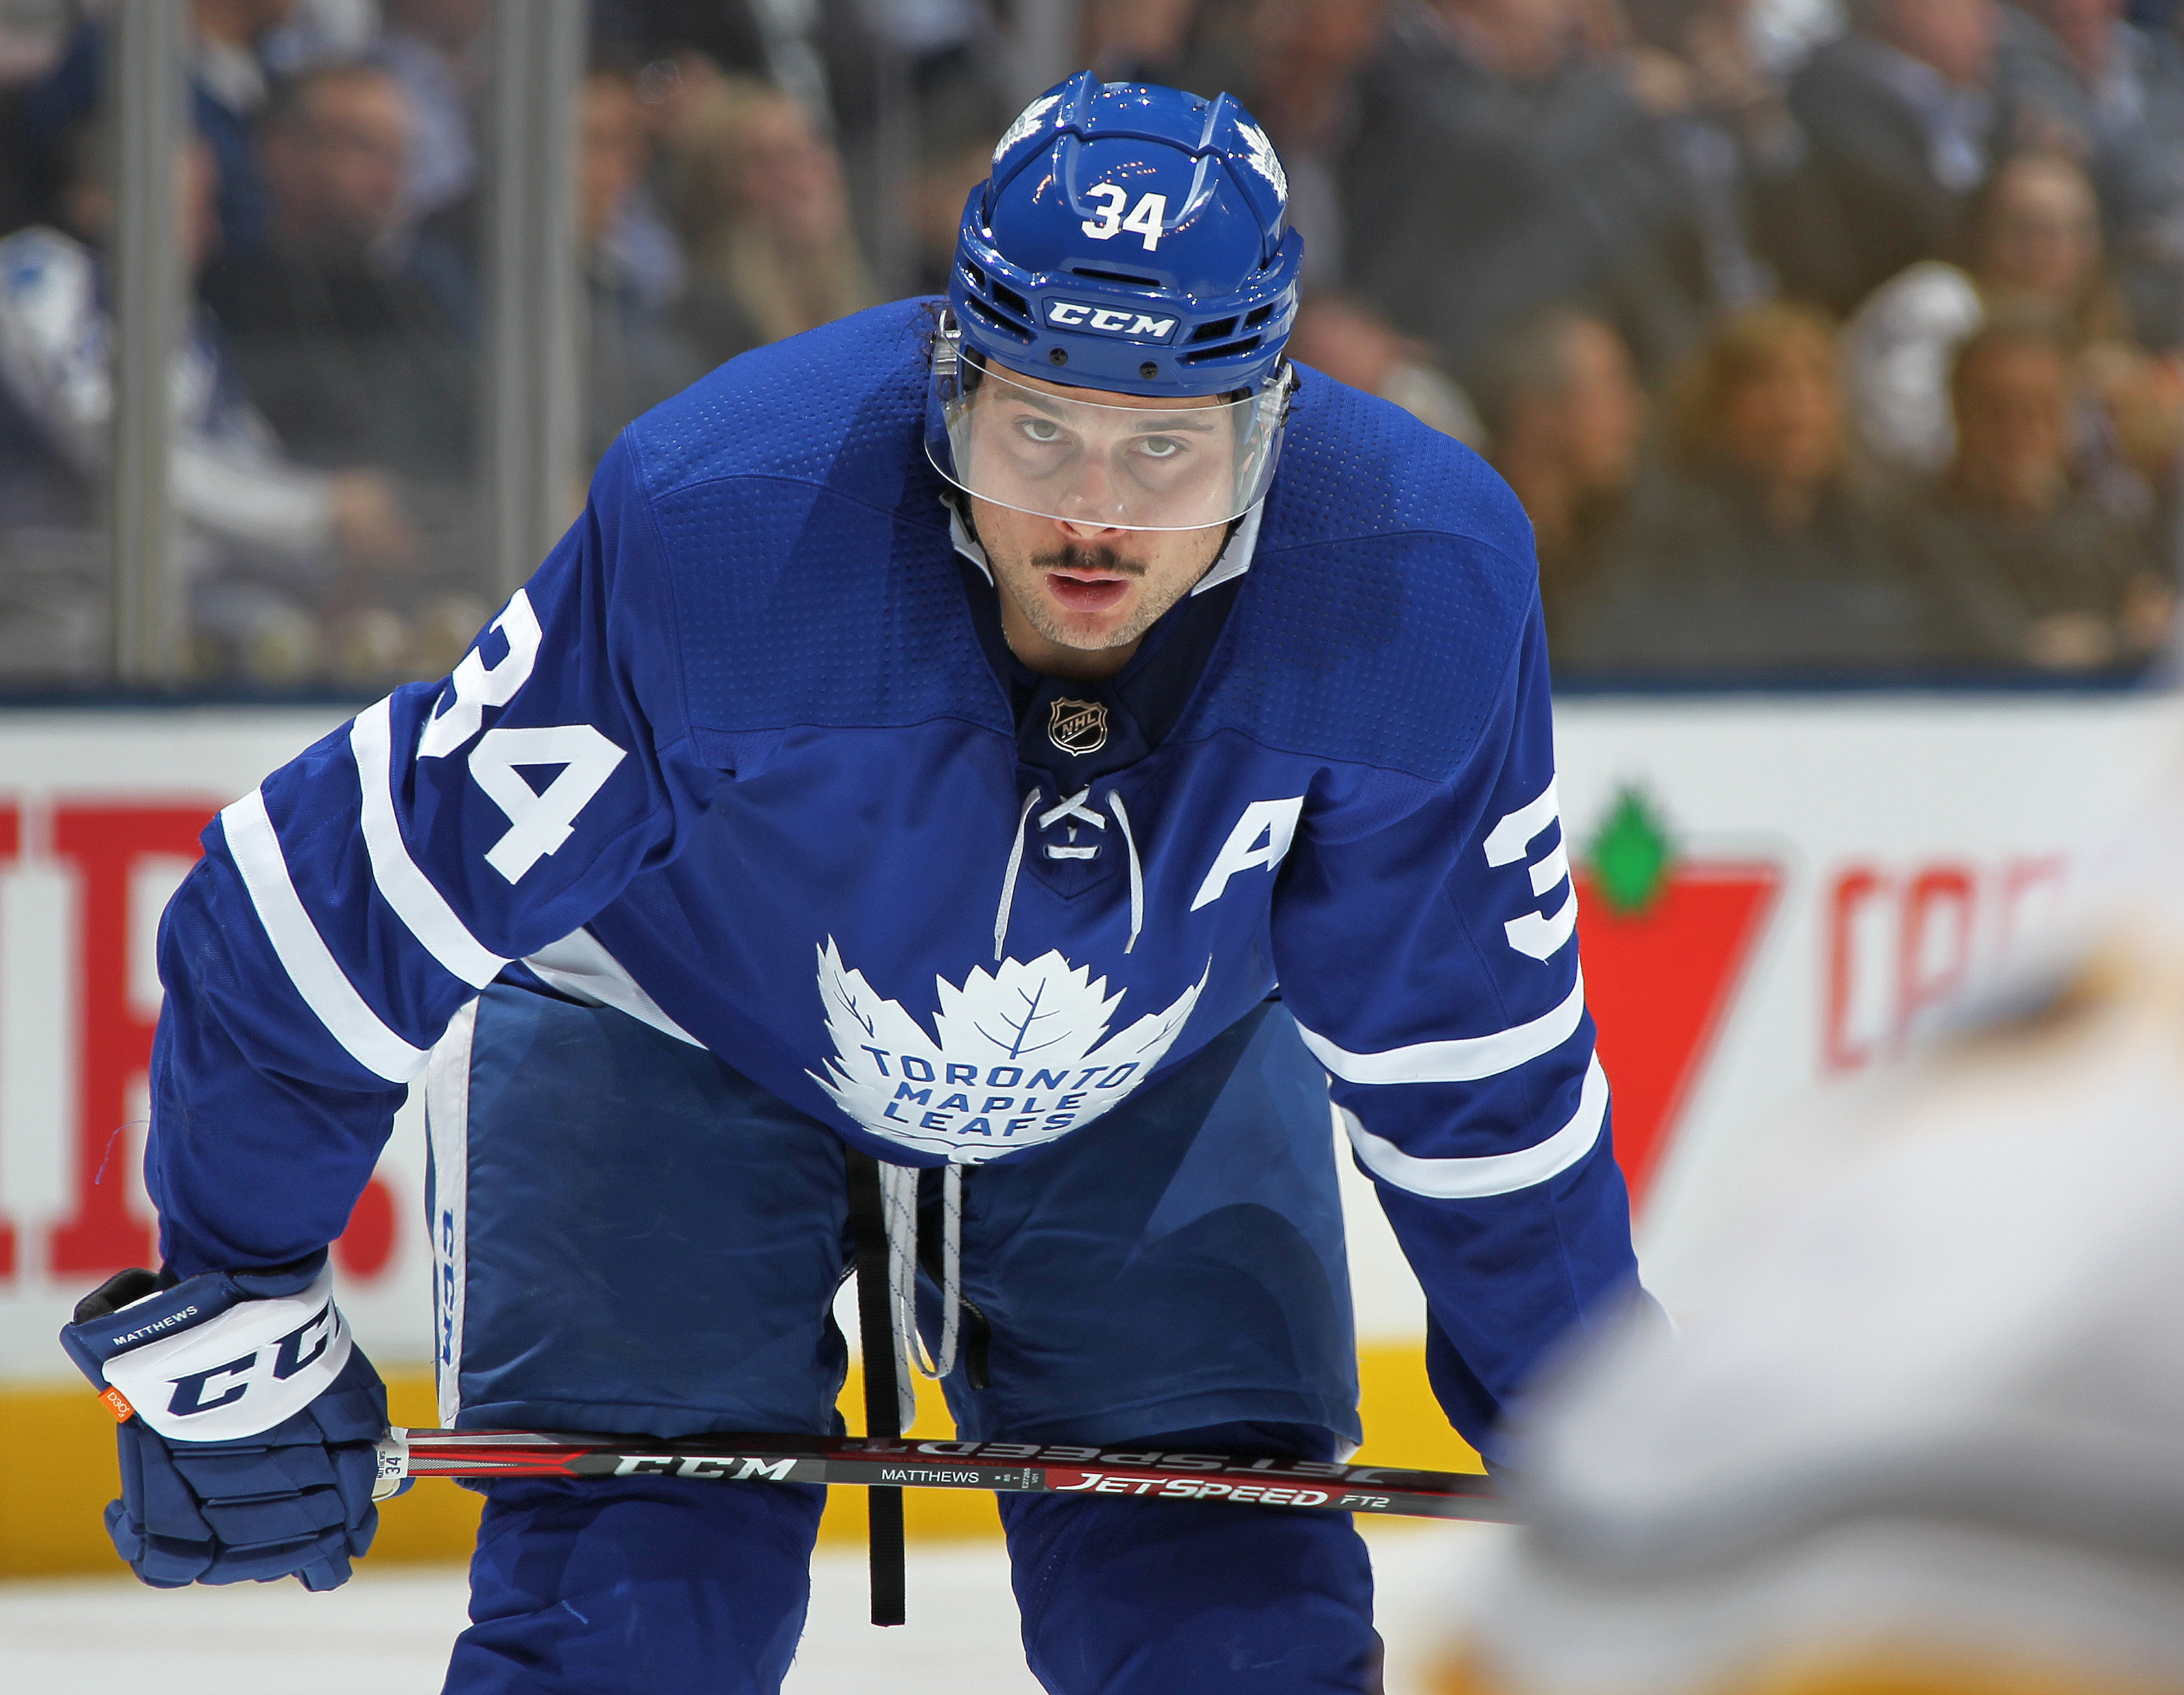 Matthews' NHL-leading 50th goal leads Maple Leafs past Jets - The